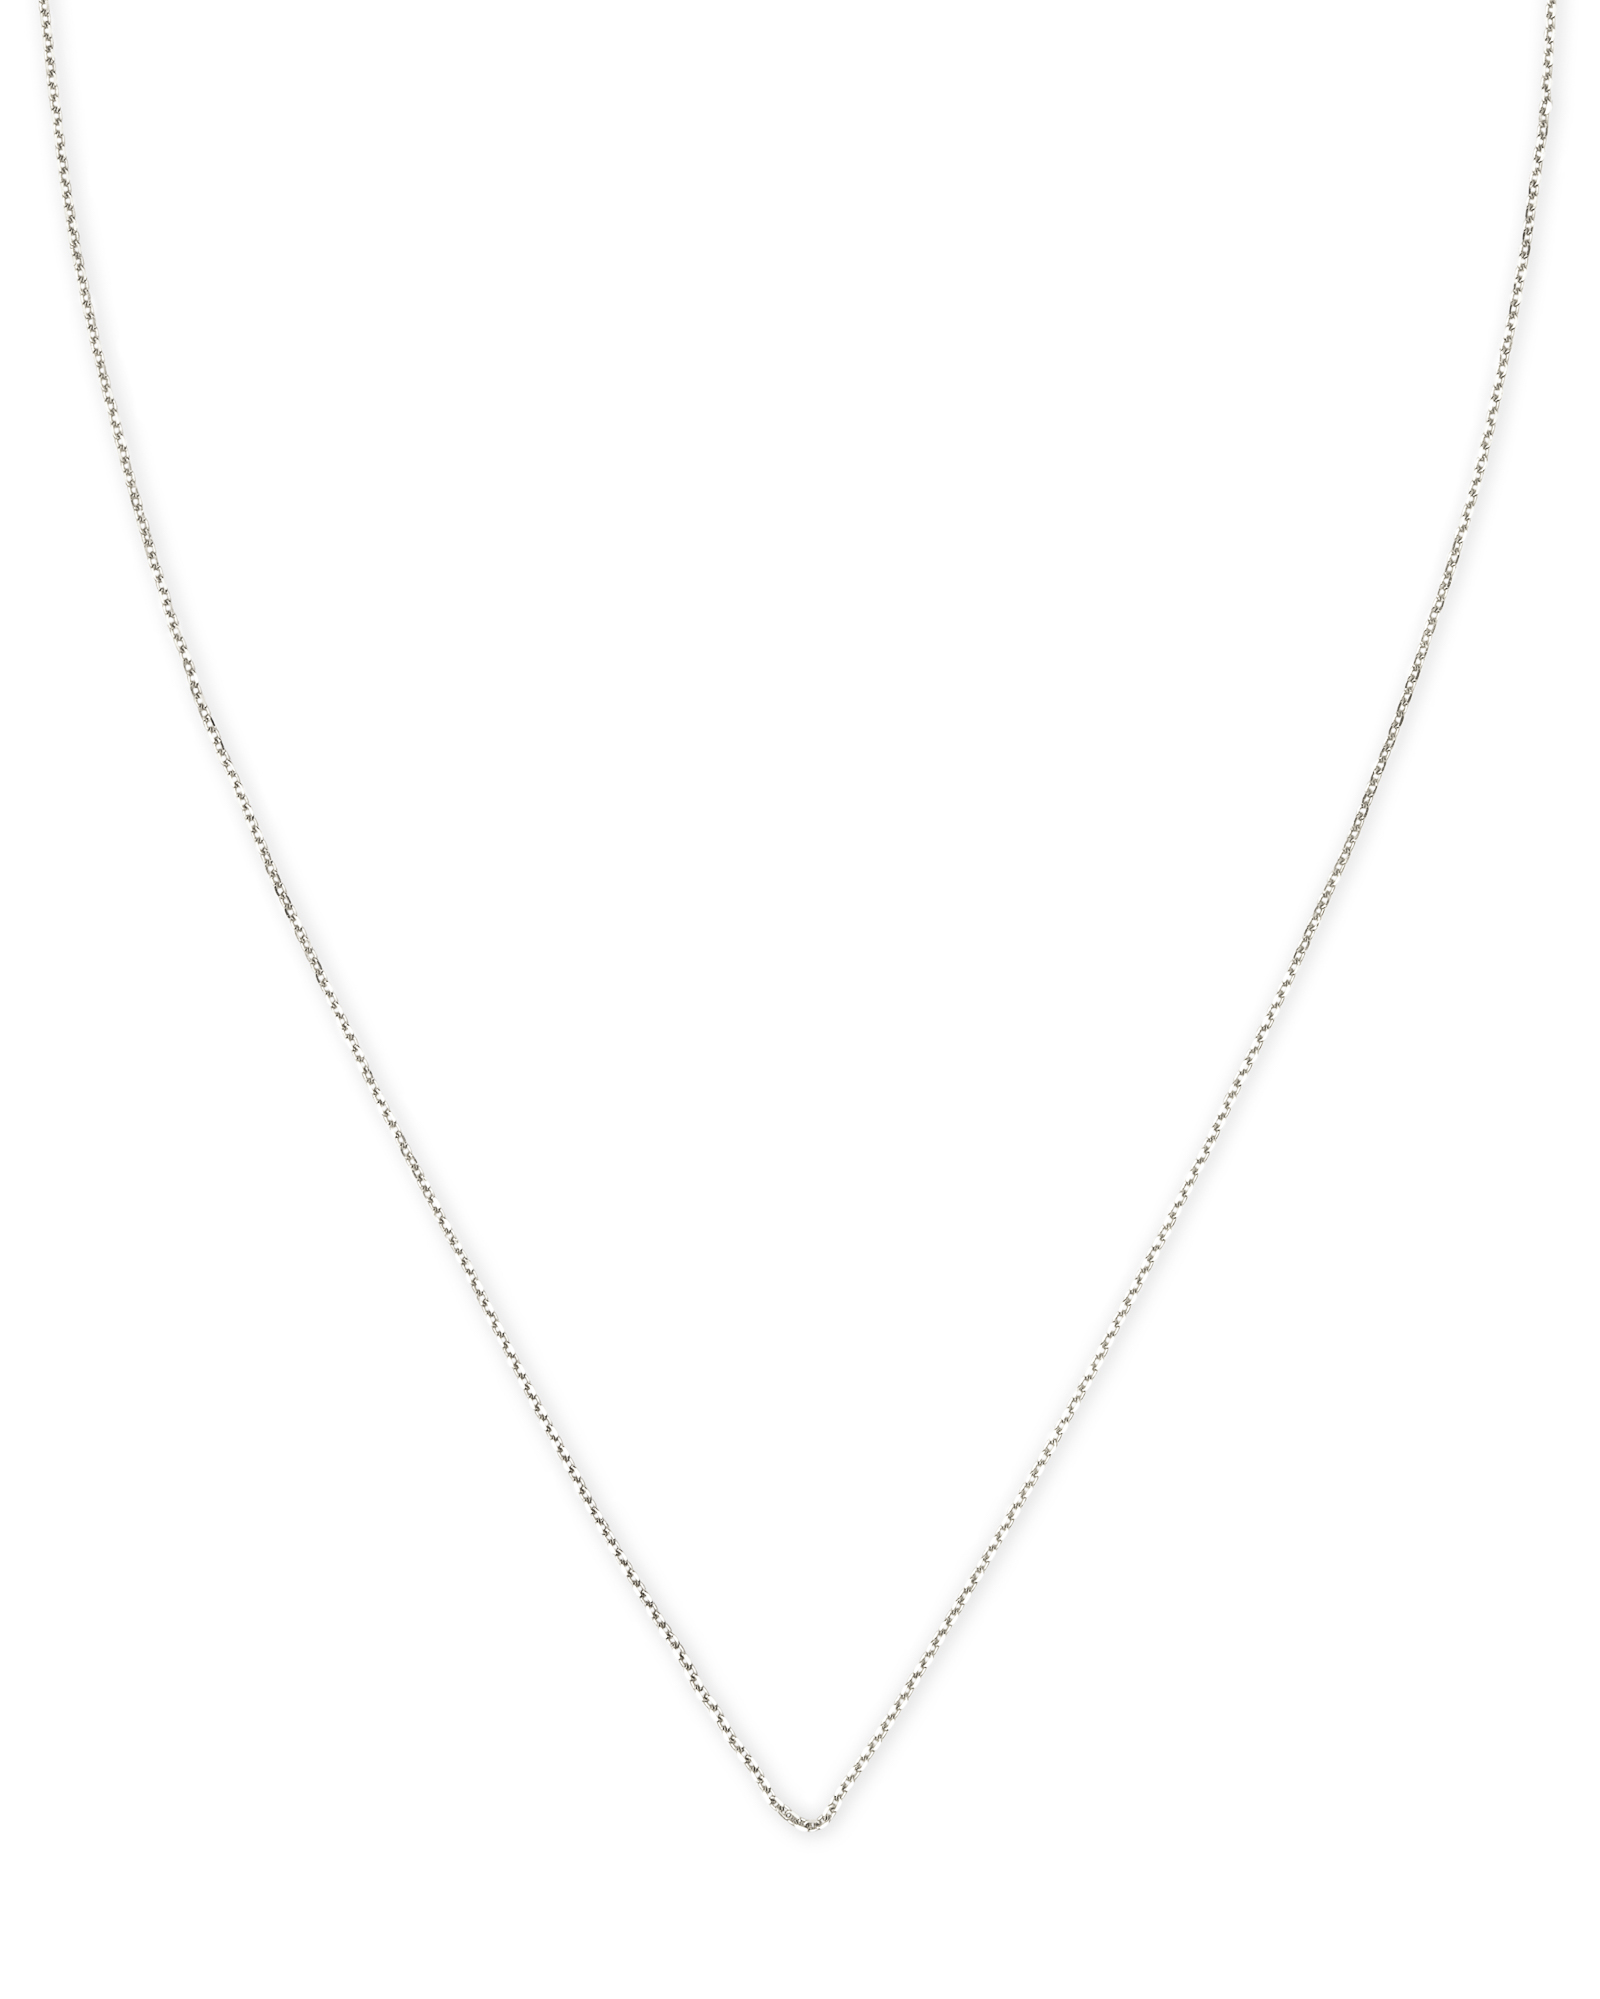 15 Thin Chain Necklace in 14k White Gold | Kendra Scott